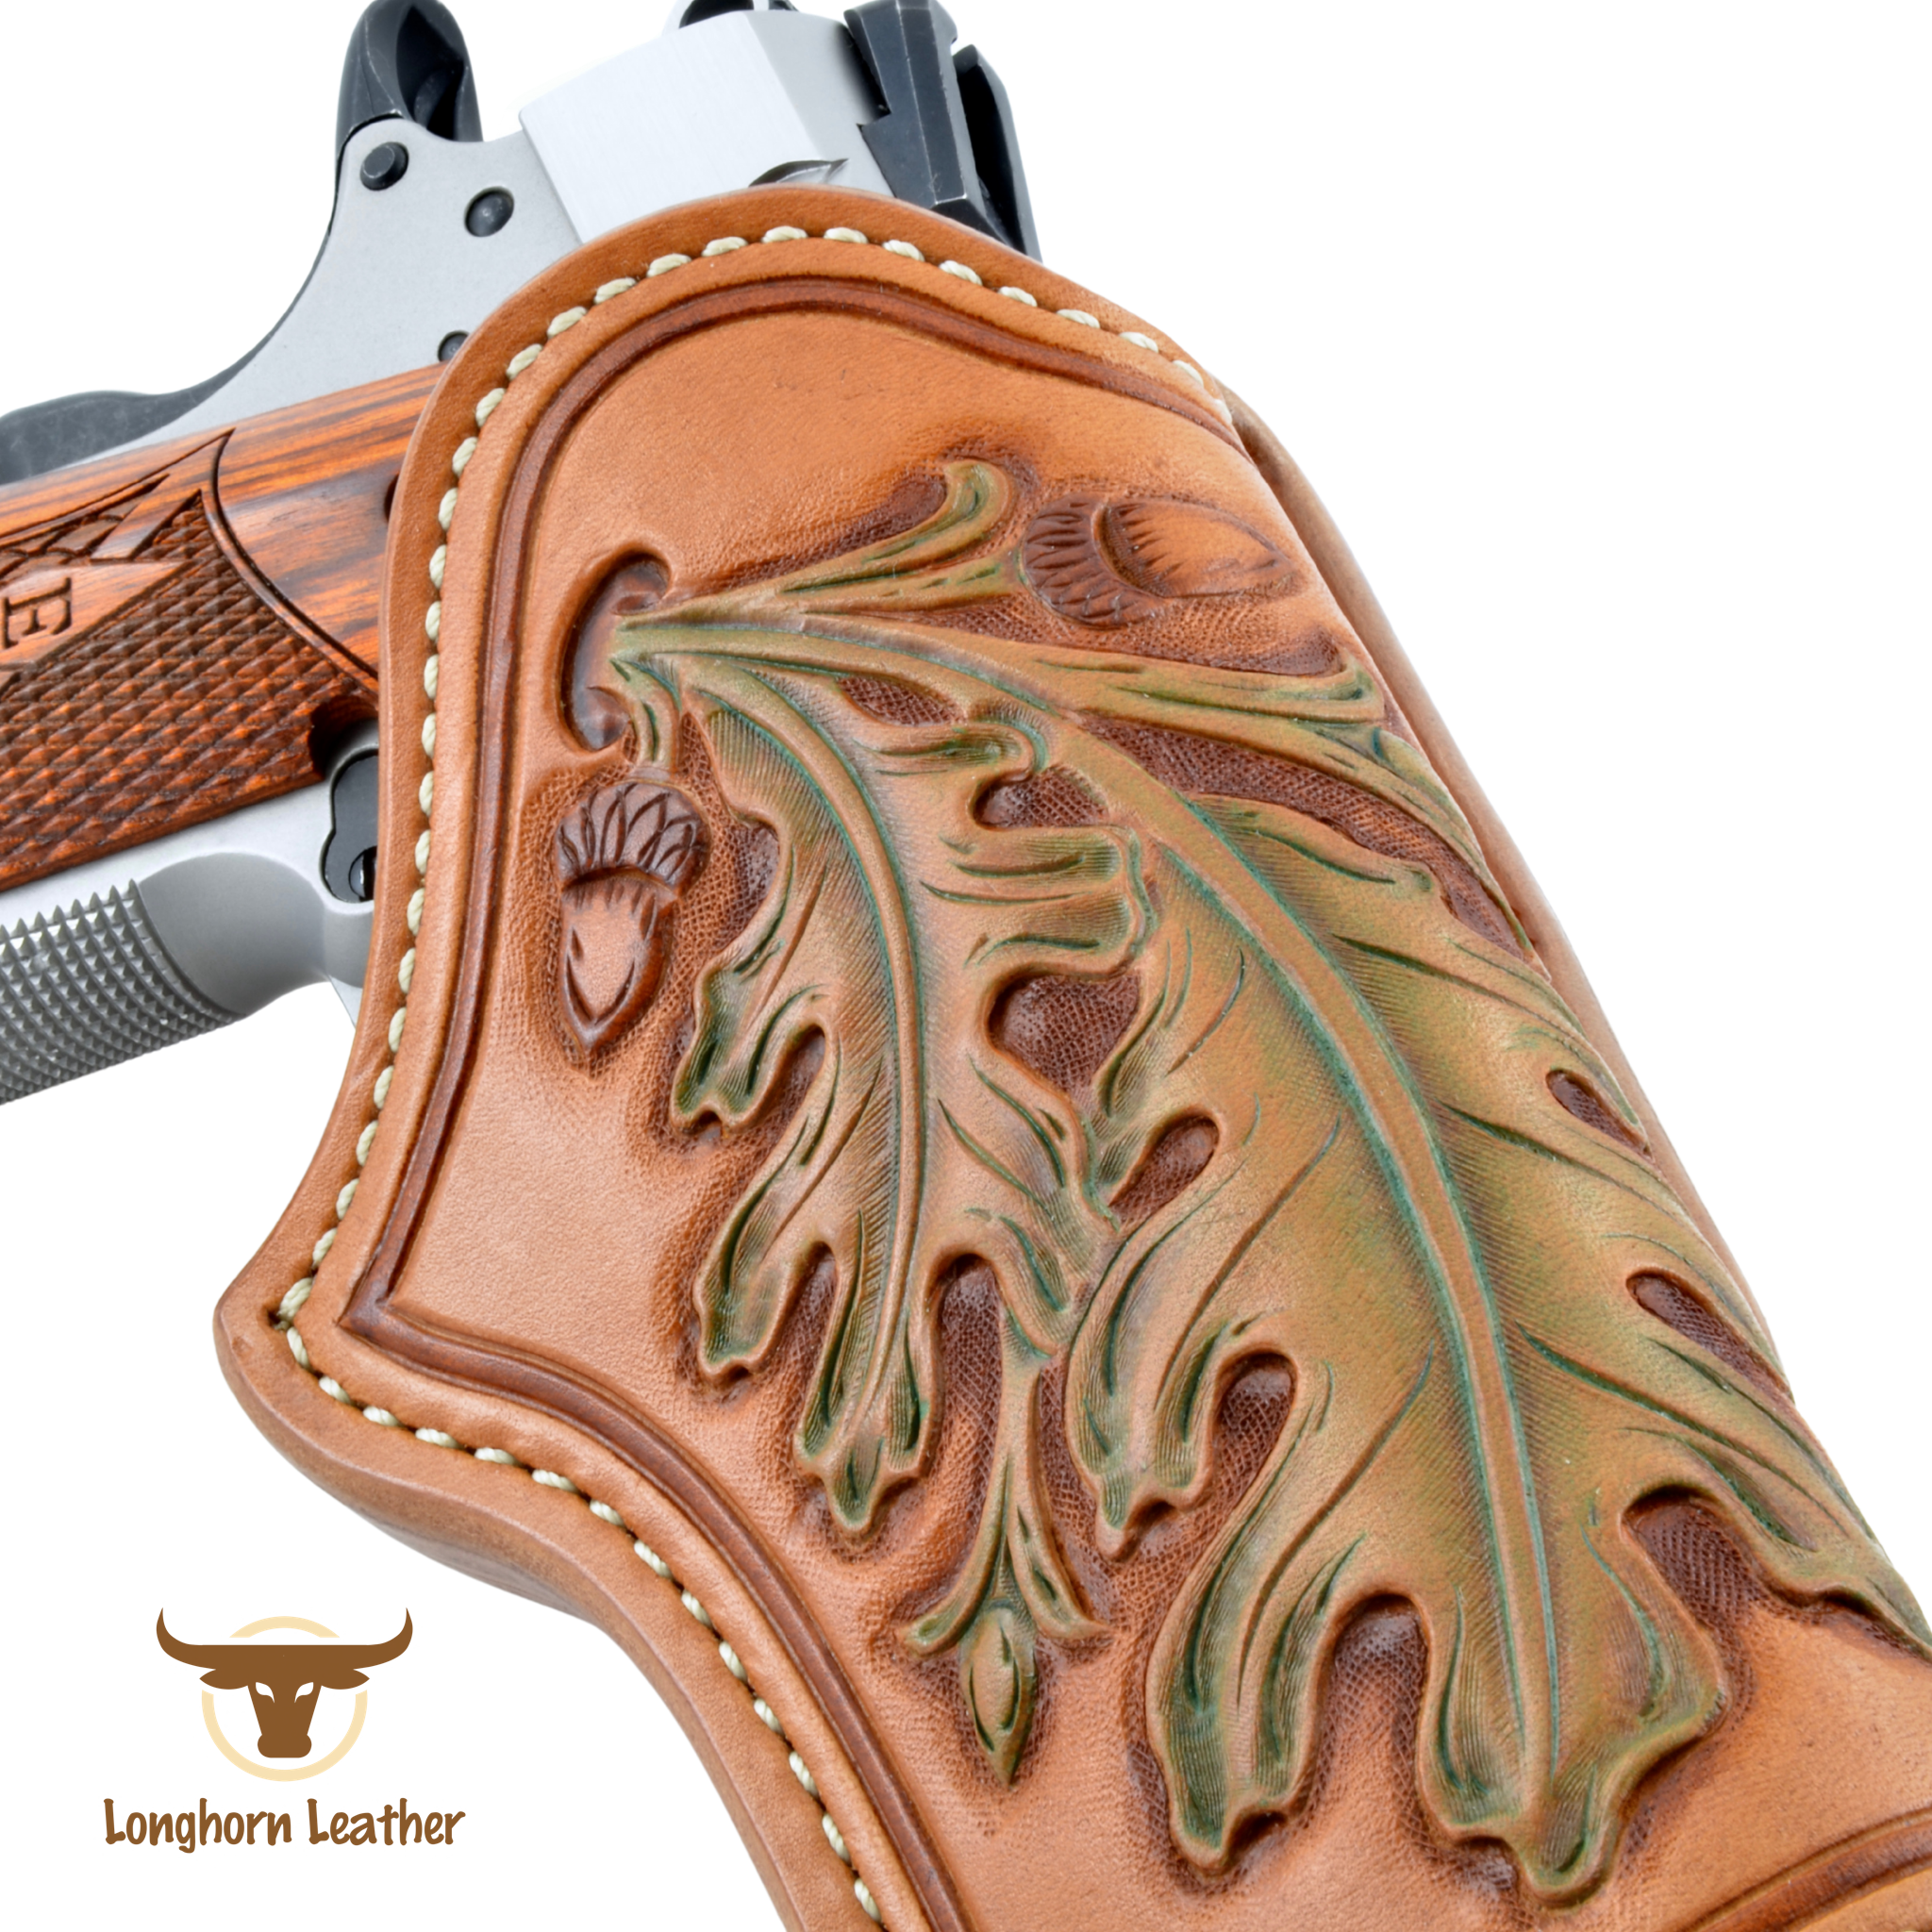 Custom leather 1911 holster featuring an “Oakleaf and Acorn” design.  Individually handcrafted at Longhorn Leather AZ